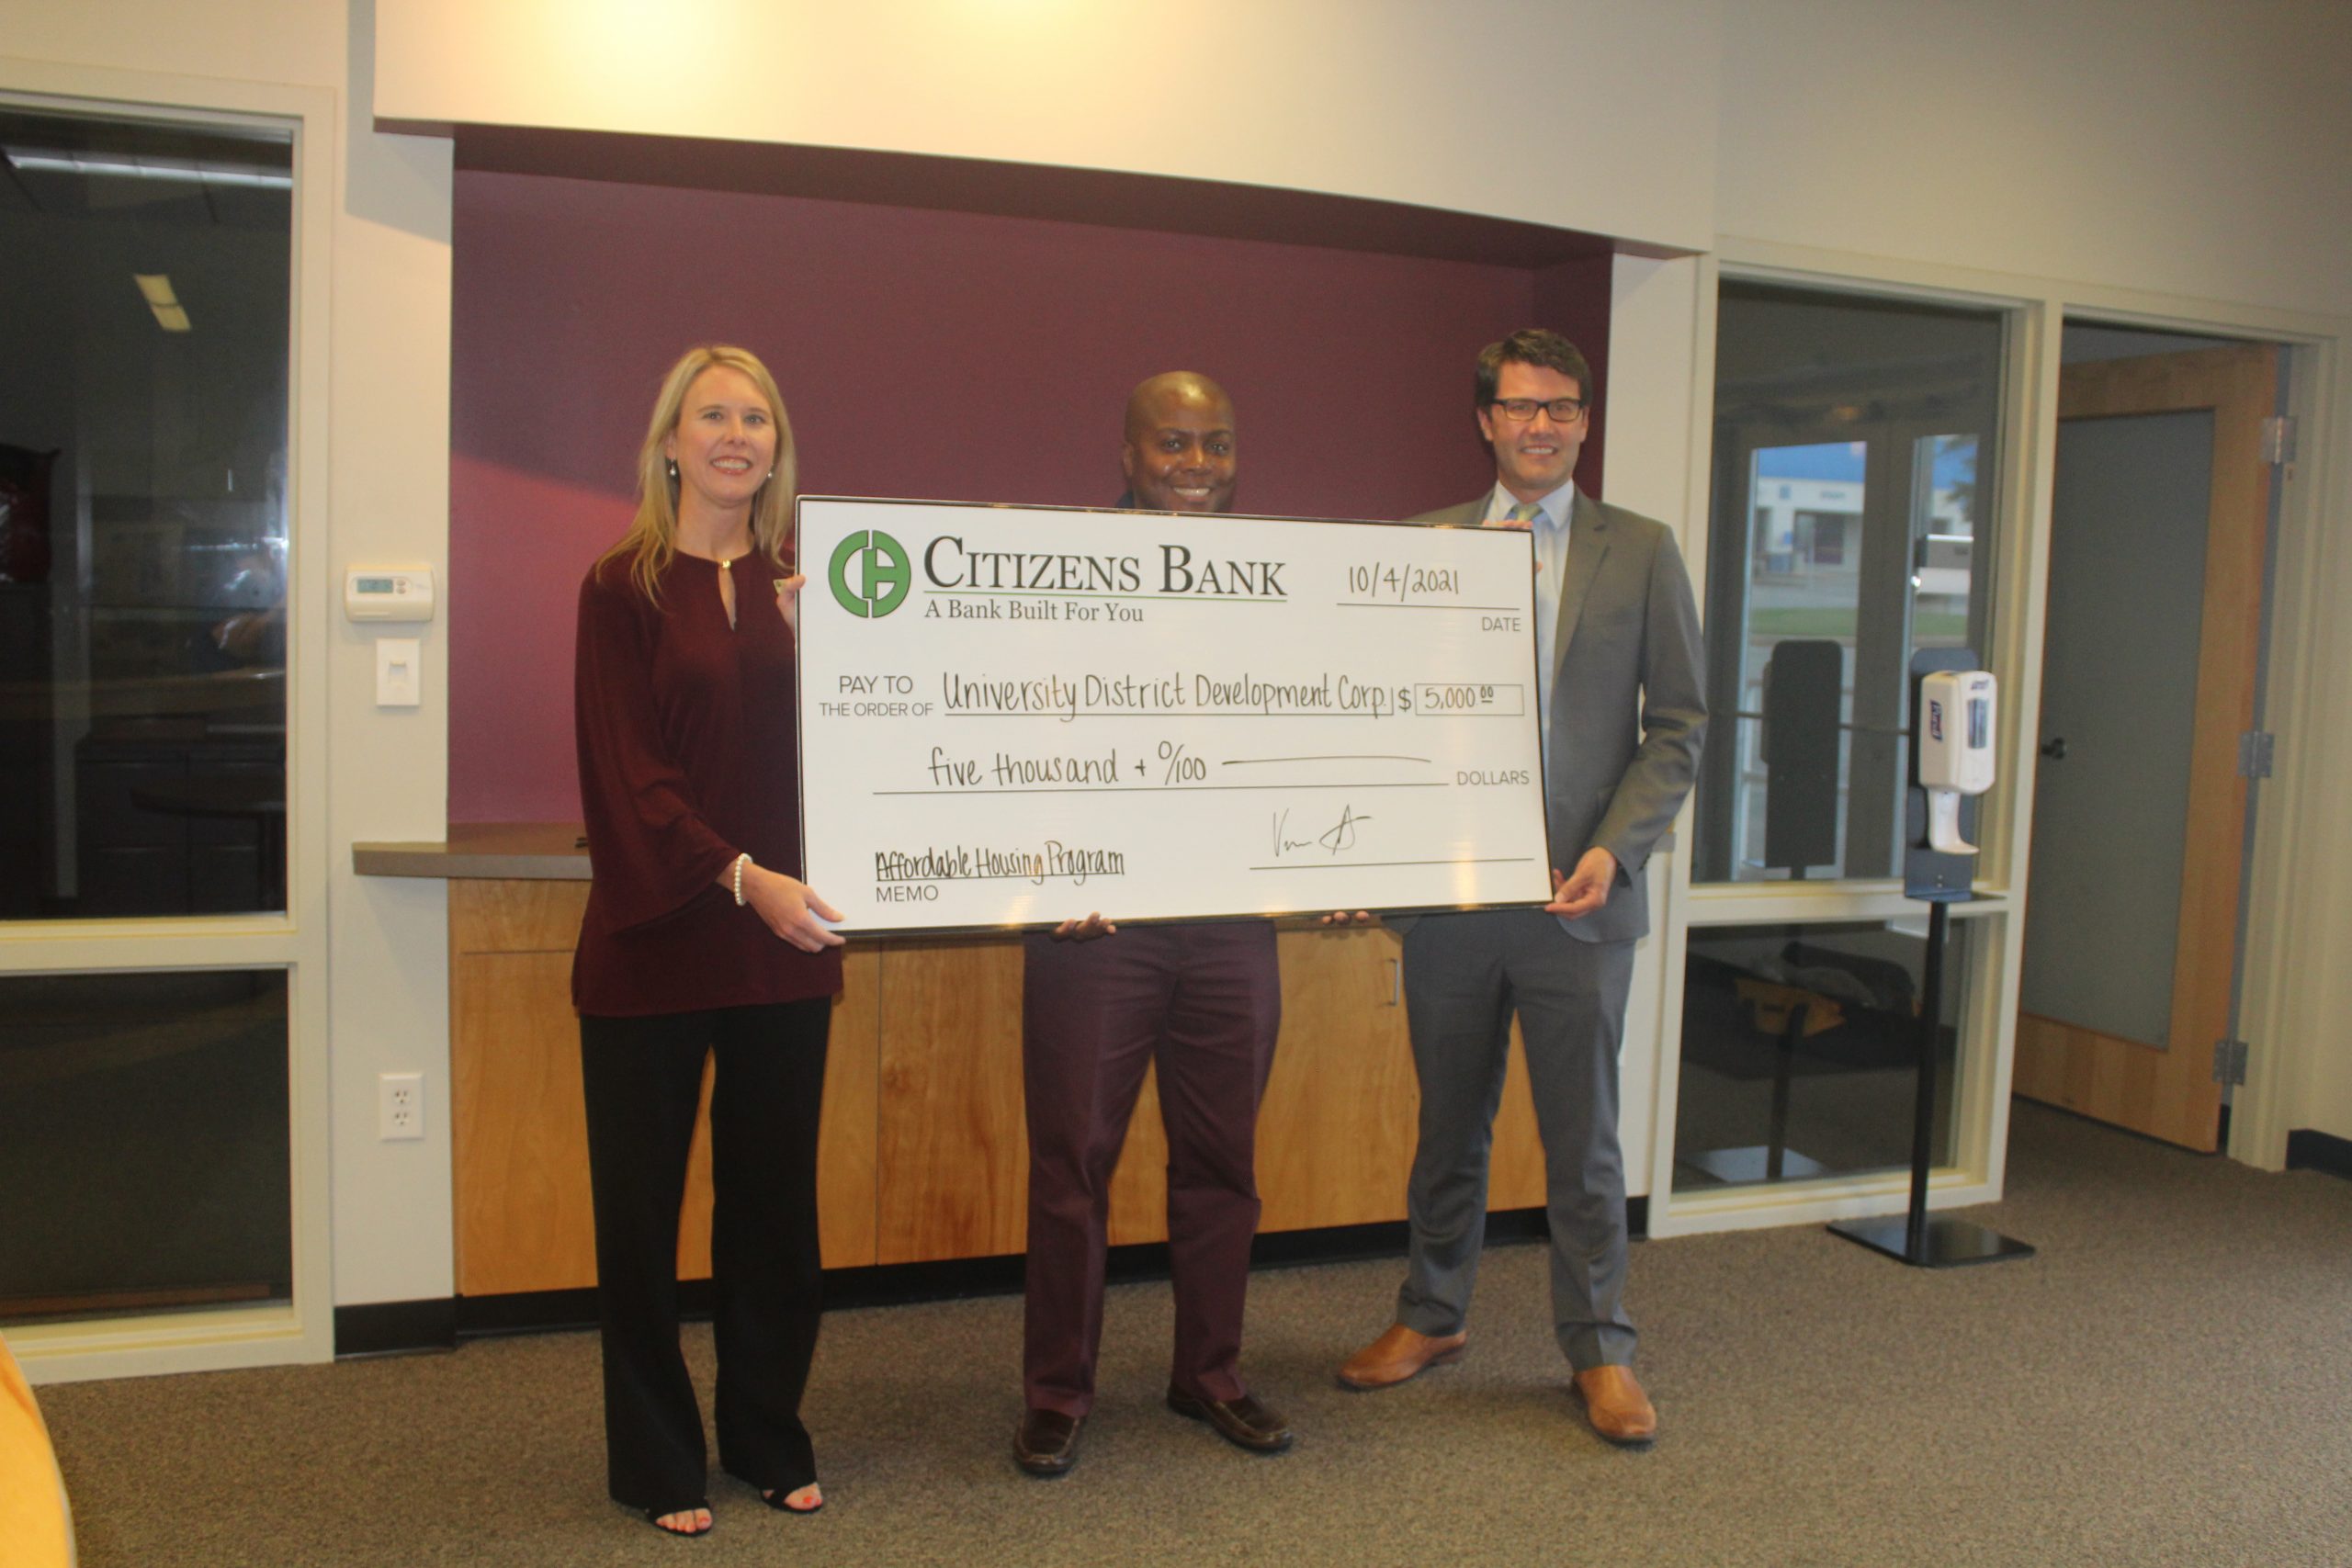 Citizens Bank representatives present a $5,000 donation to the University District Development Corporation to help with affordable housing efforts within University District. Pictured from left to right are Lisa Davis of Batesville, community reinvestment act officer and senior vice president, managing director of enterprise risk management, of Citizens Bank; Barrett Allen of Little Rock, executive director of University District Development Corporation; and Vernon Scott of Little Rock, regional president of Citizens Bank.